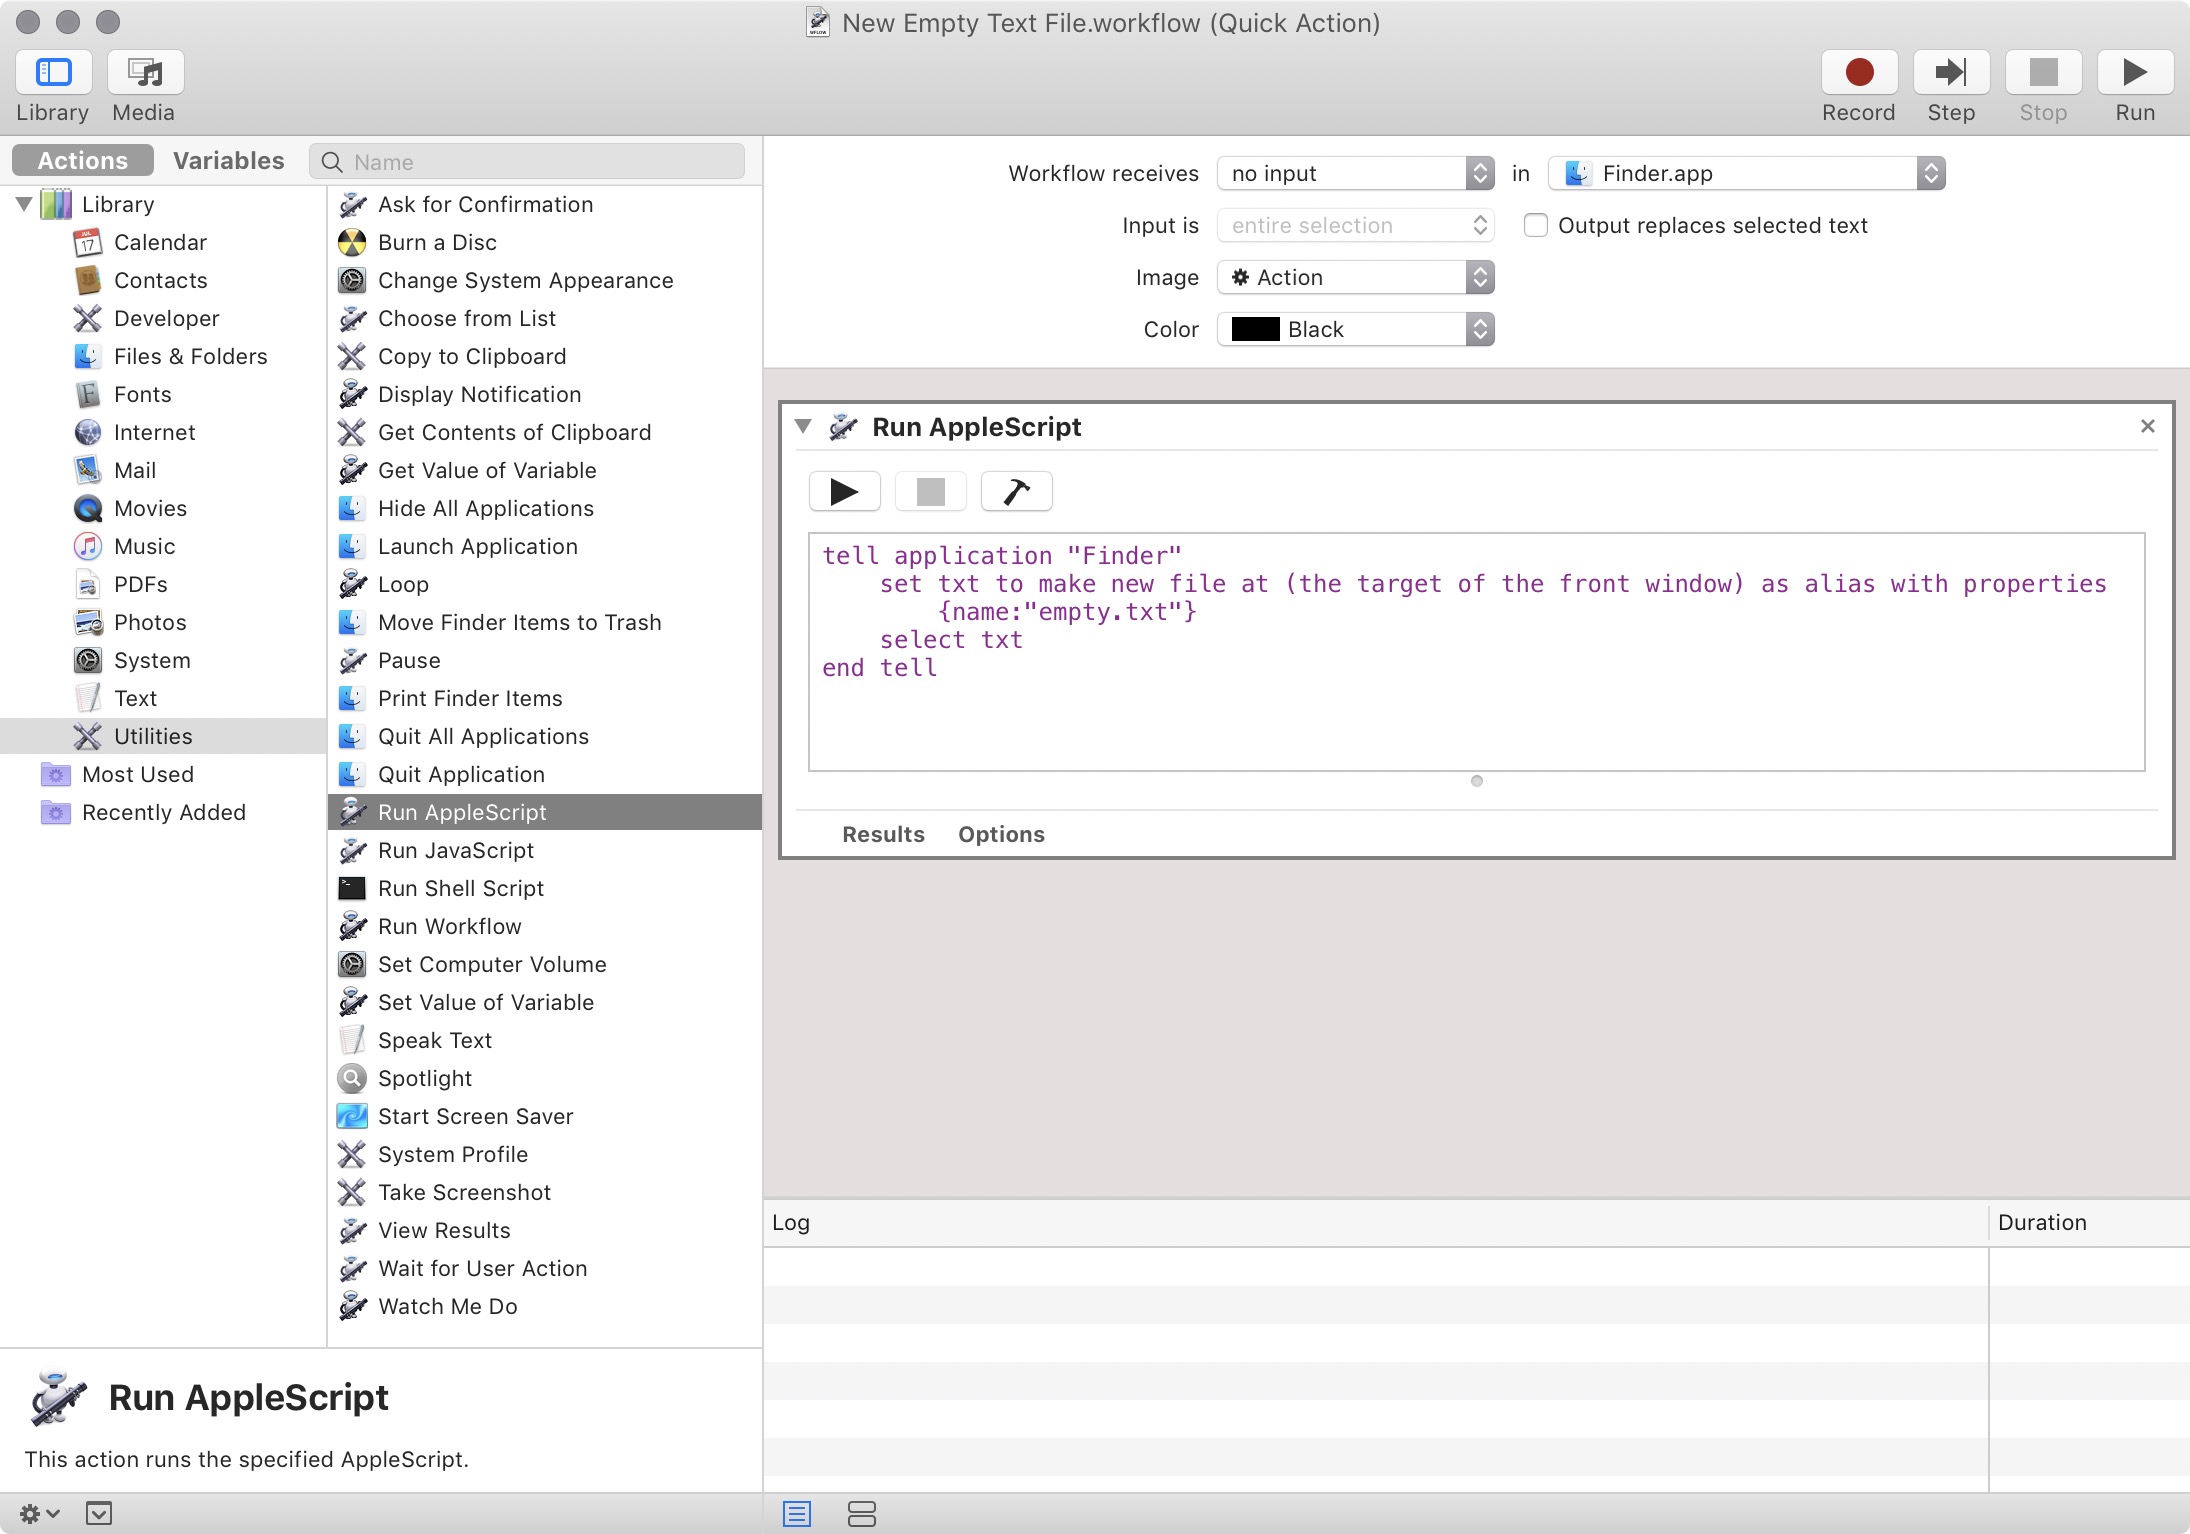 text files for mac